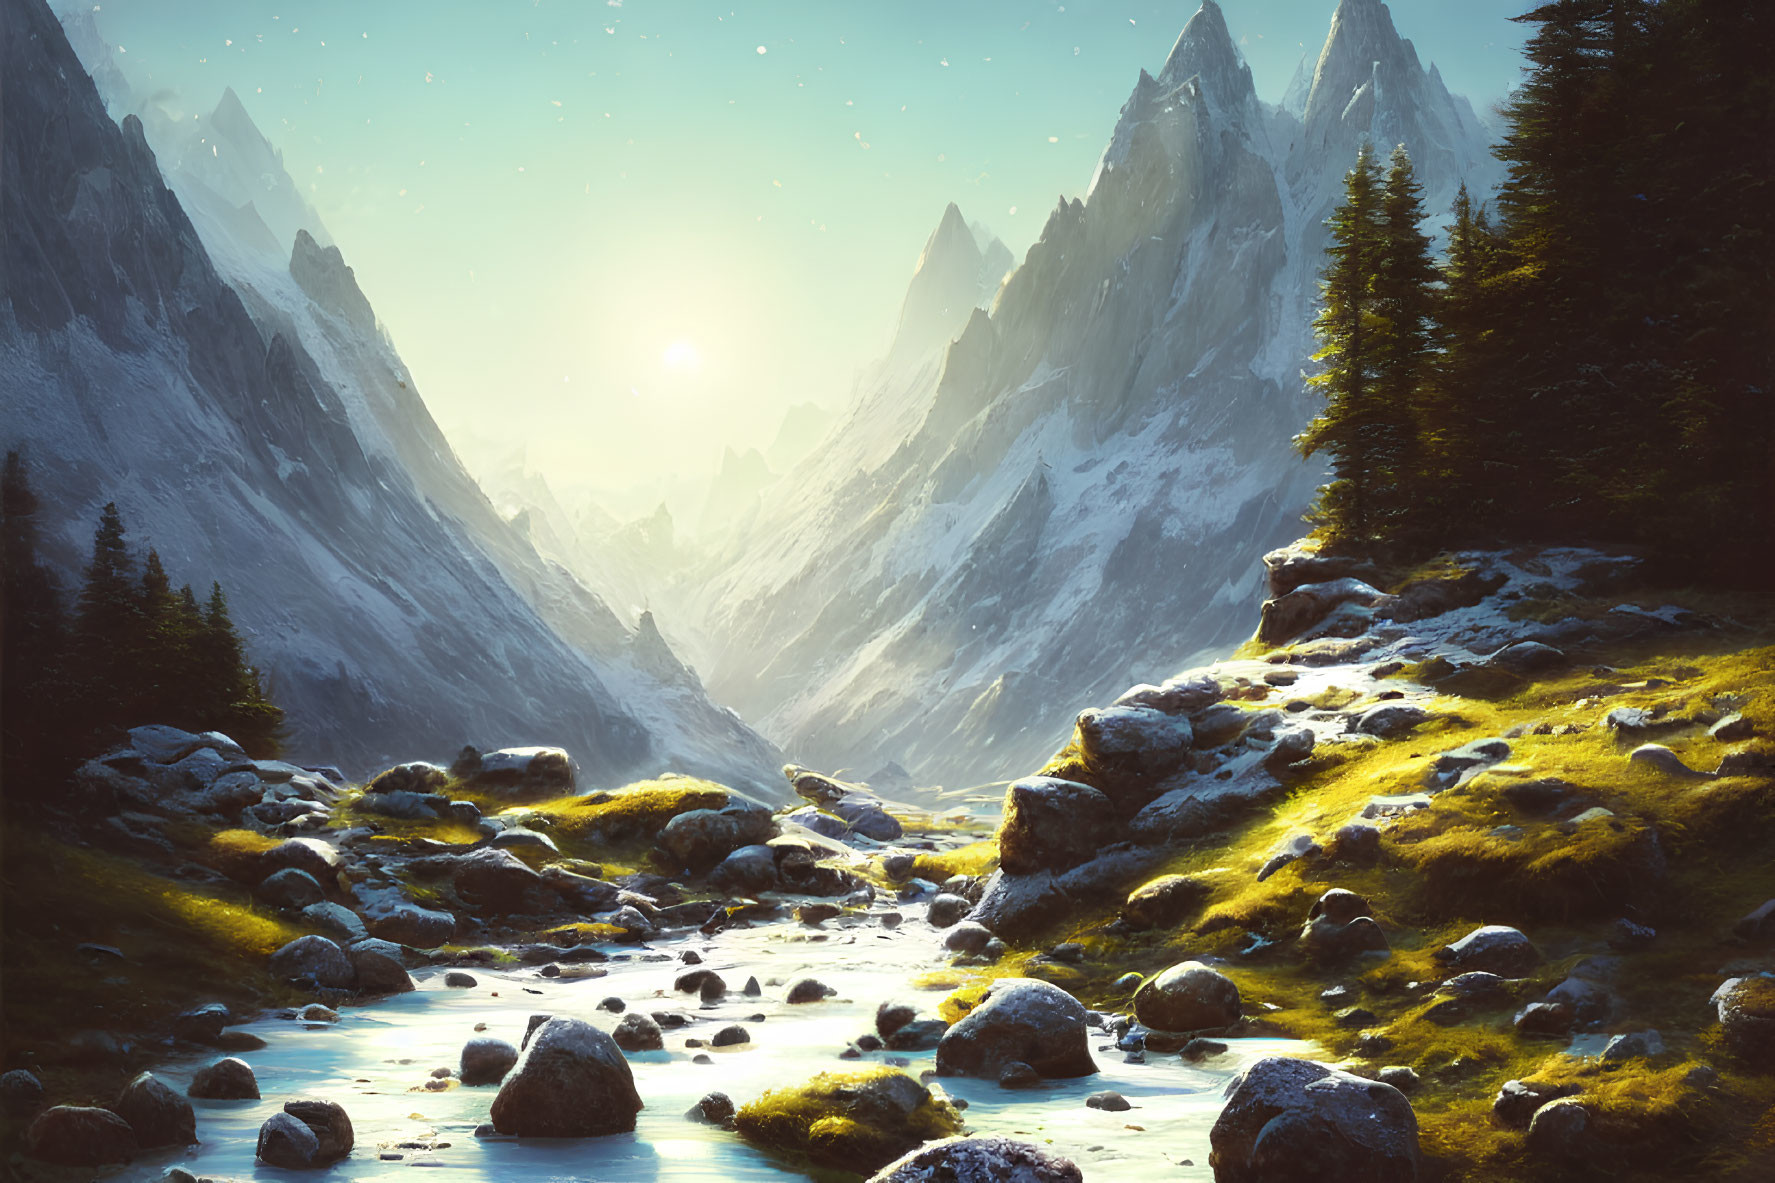 Scenic mountain valley with stream, sunlit peaks, and boulders